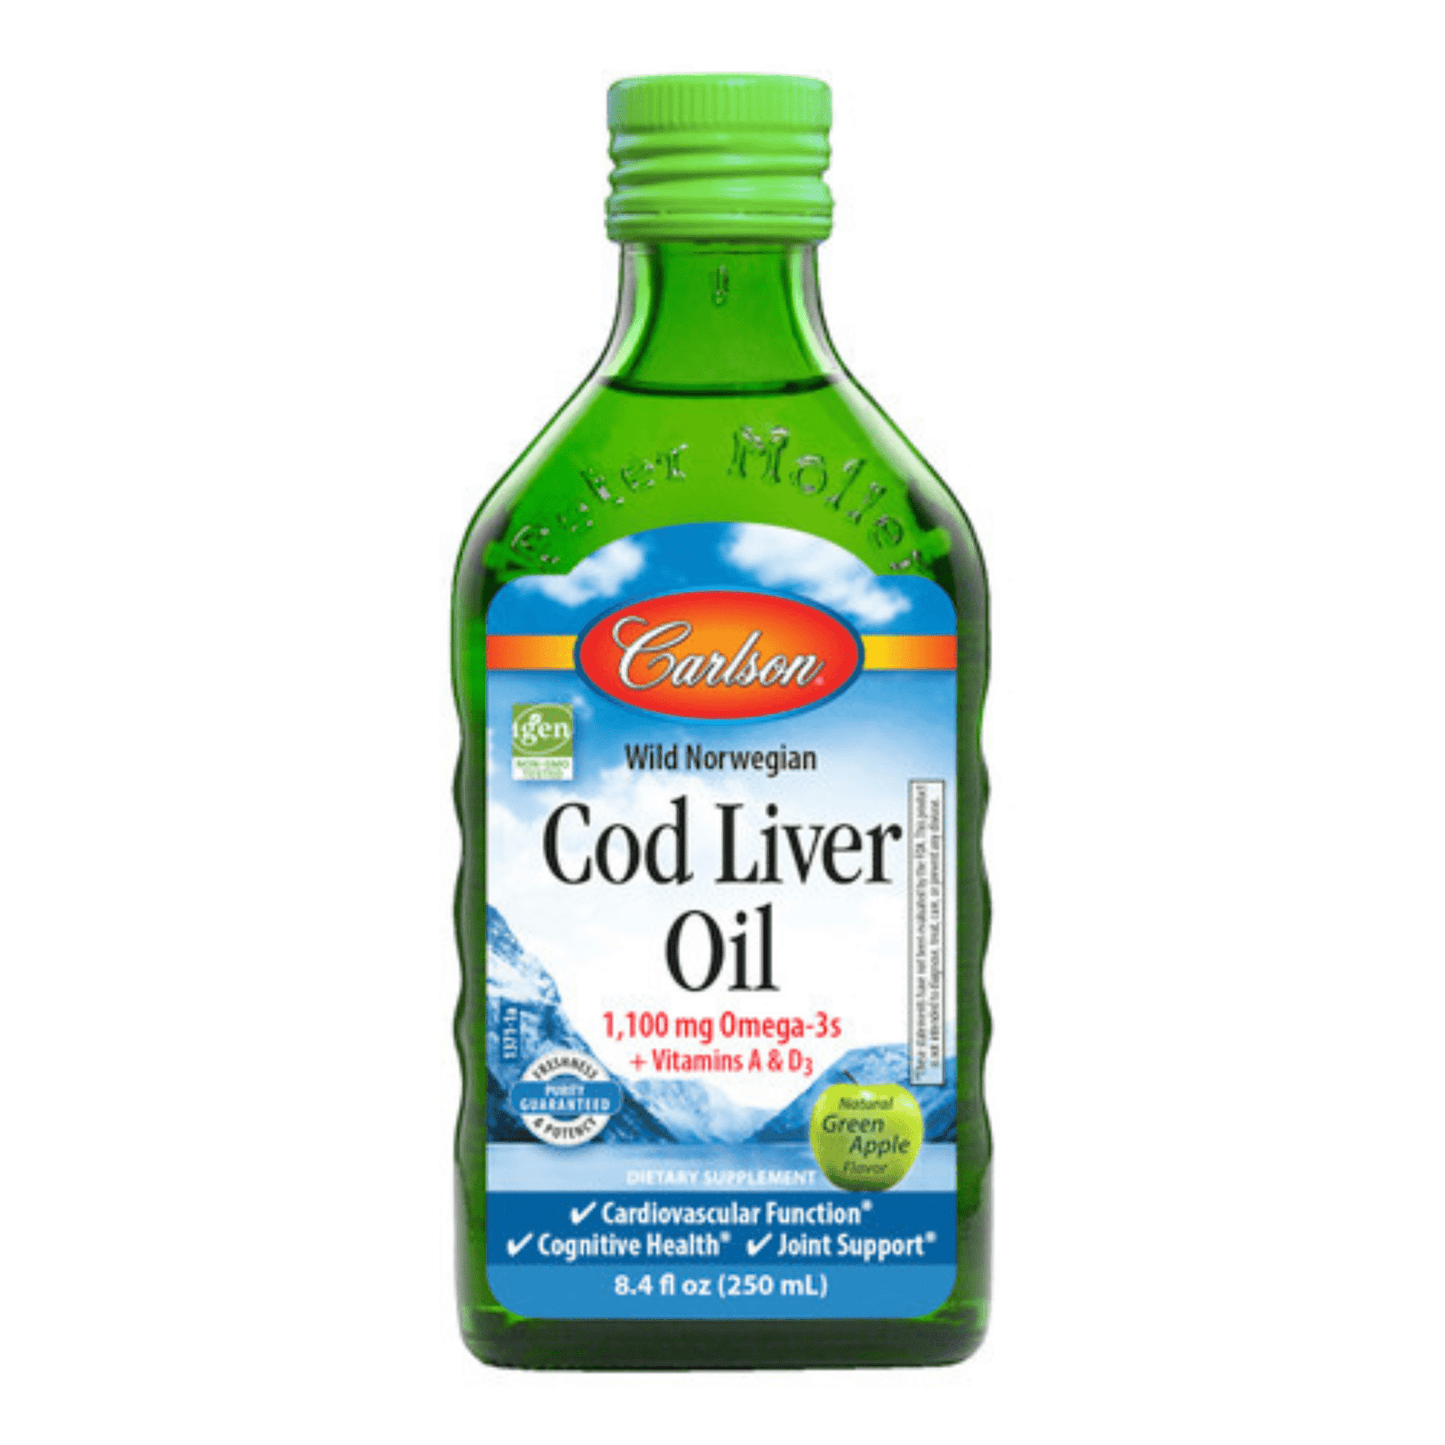 Primary Image of Cod Liver Oil Green Apple